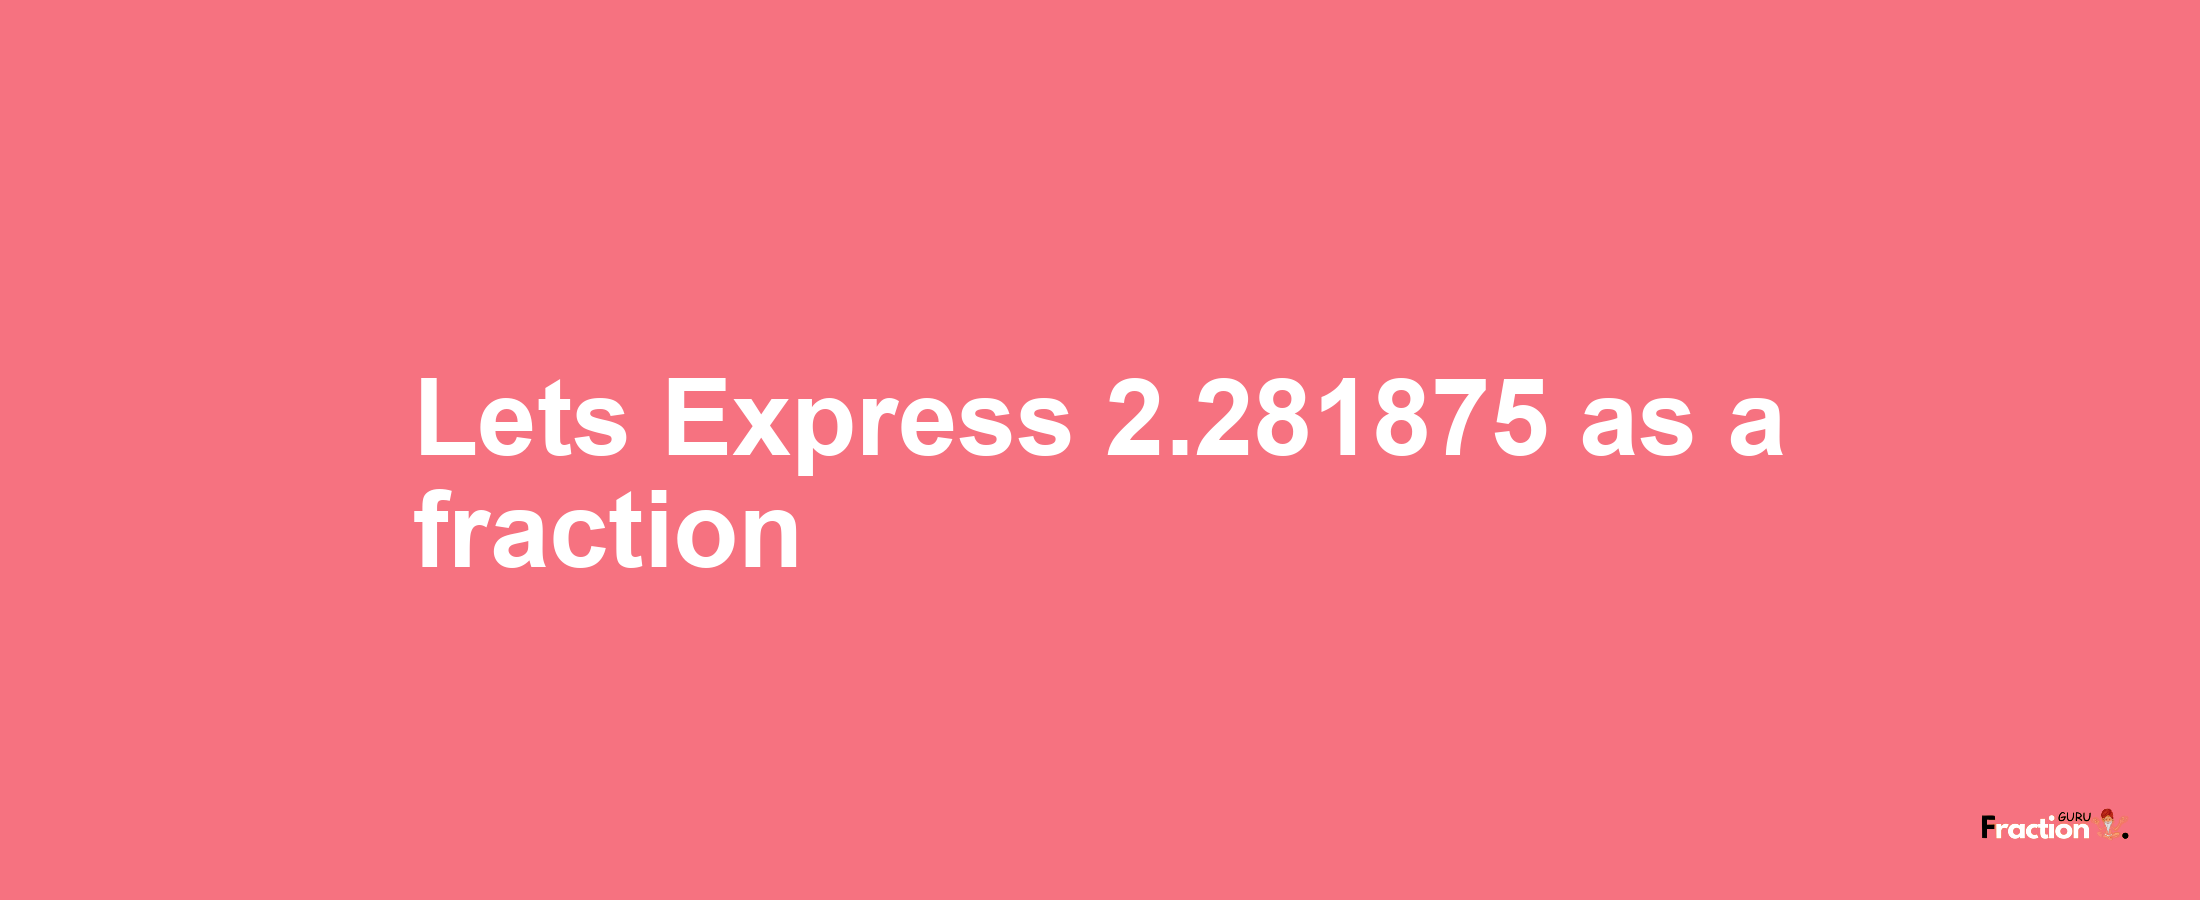 Lets Express 2.281875 as afraction